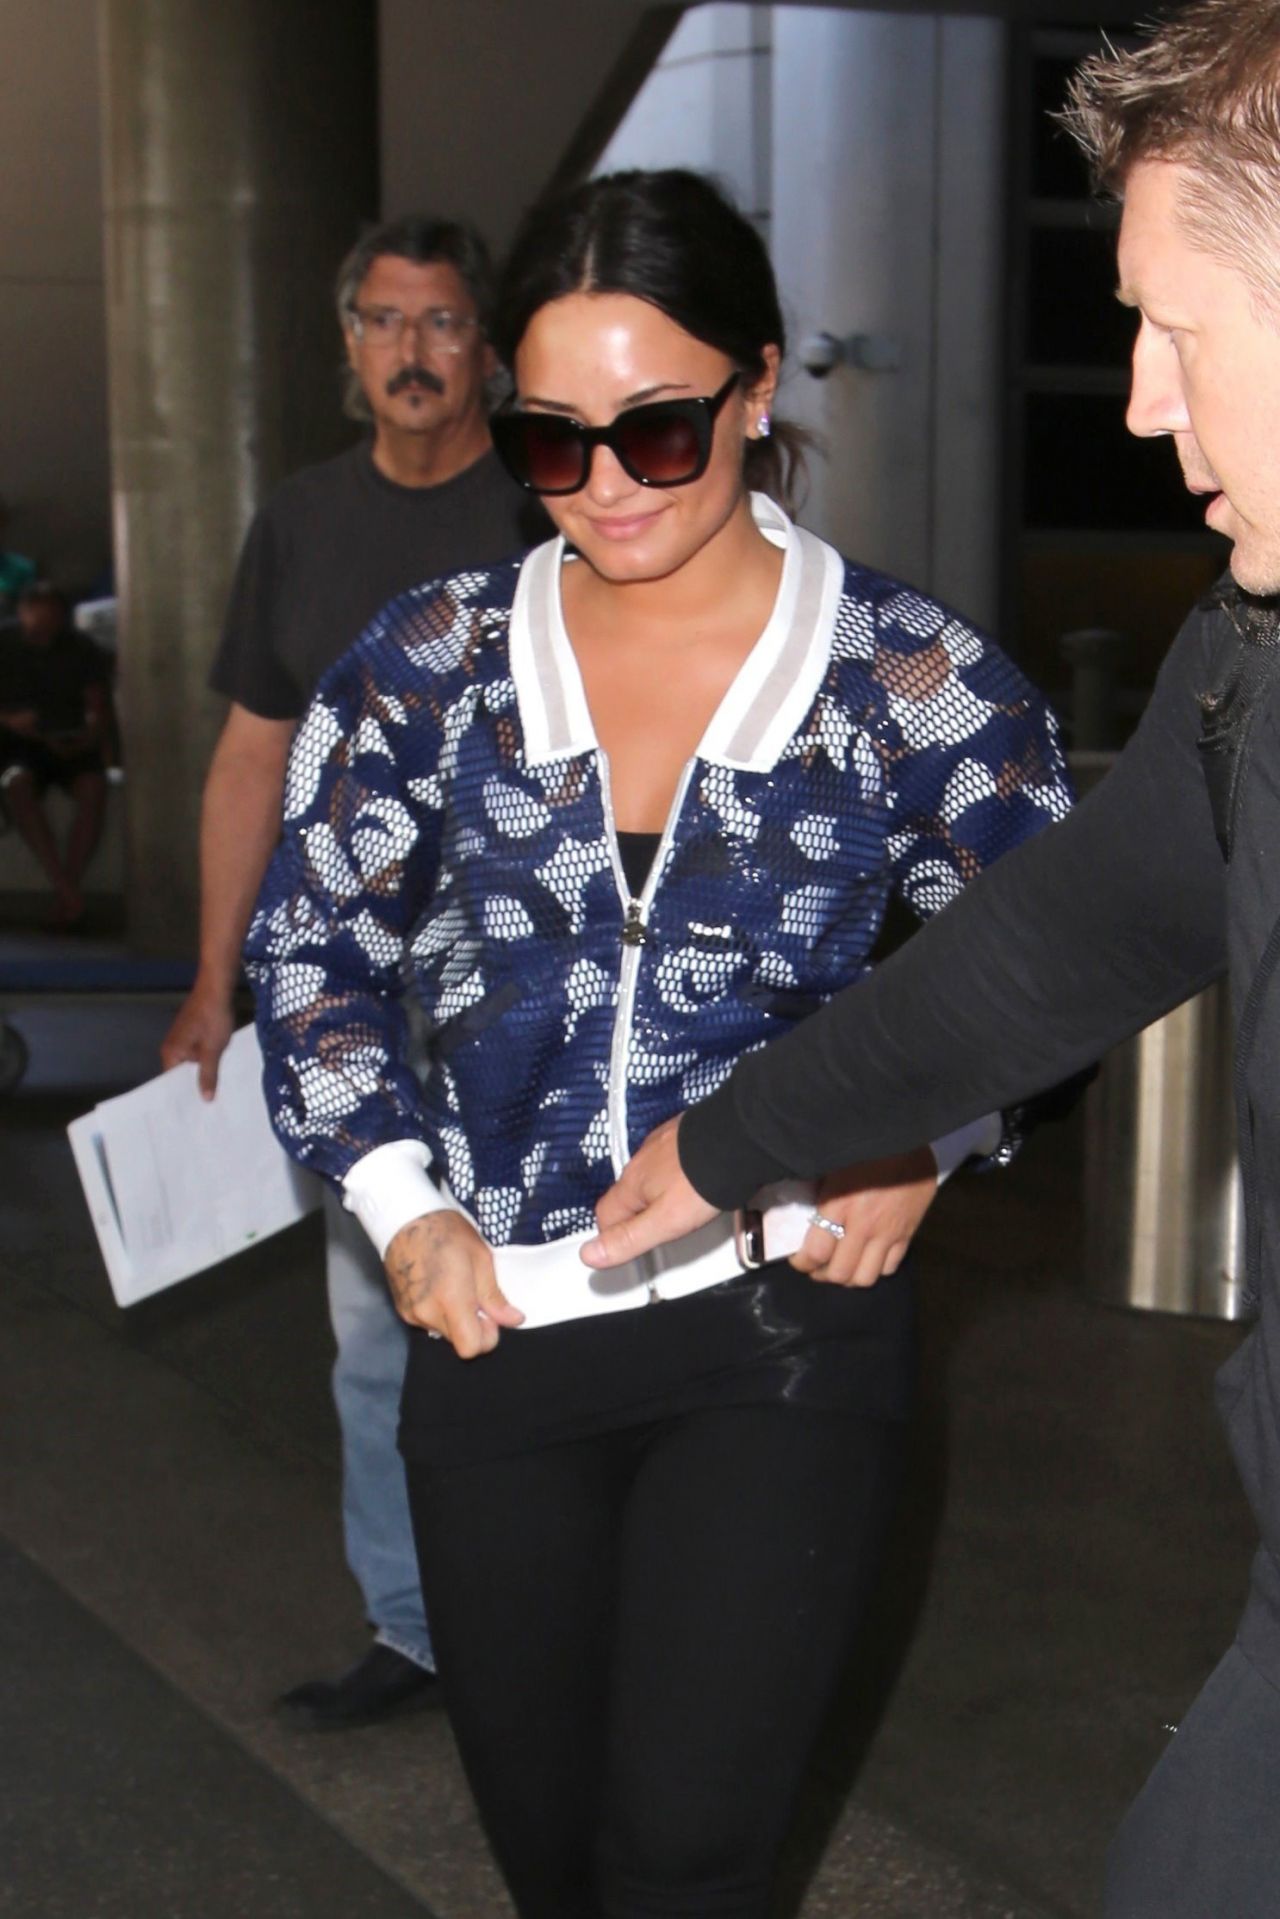 Demi Lovato Arriving at LAX Airport in Los Angeles April 17, 2011 – Star  Style